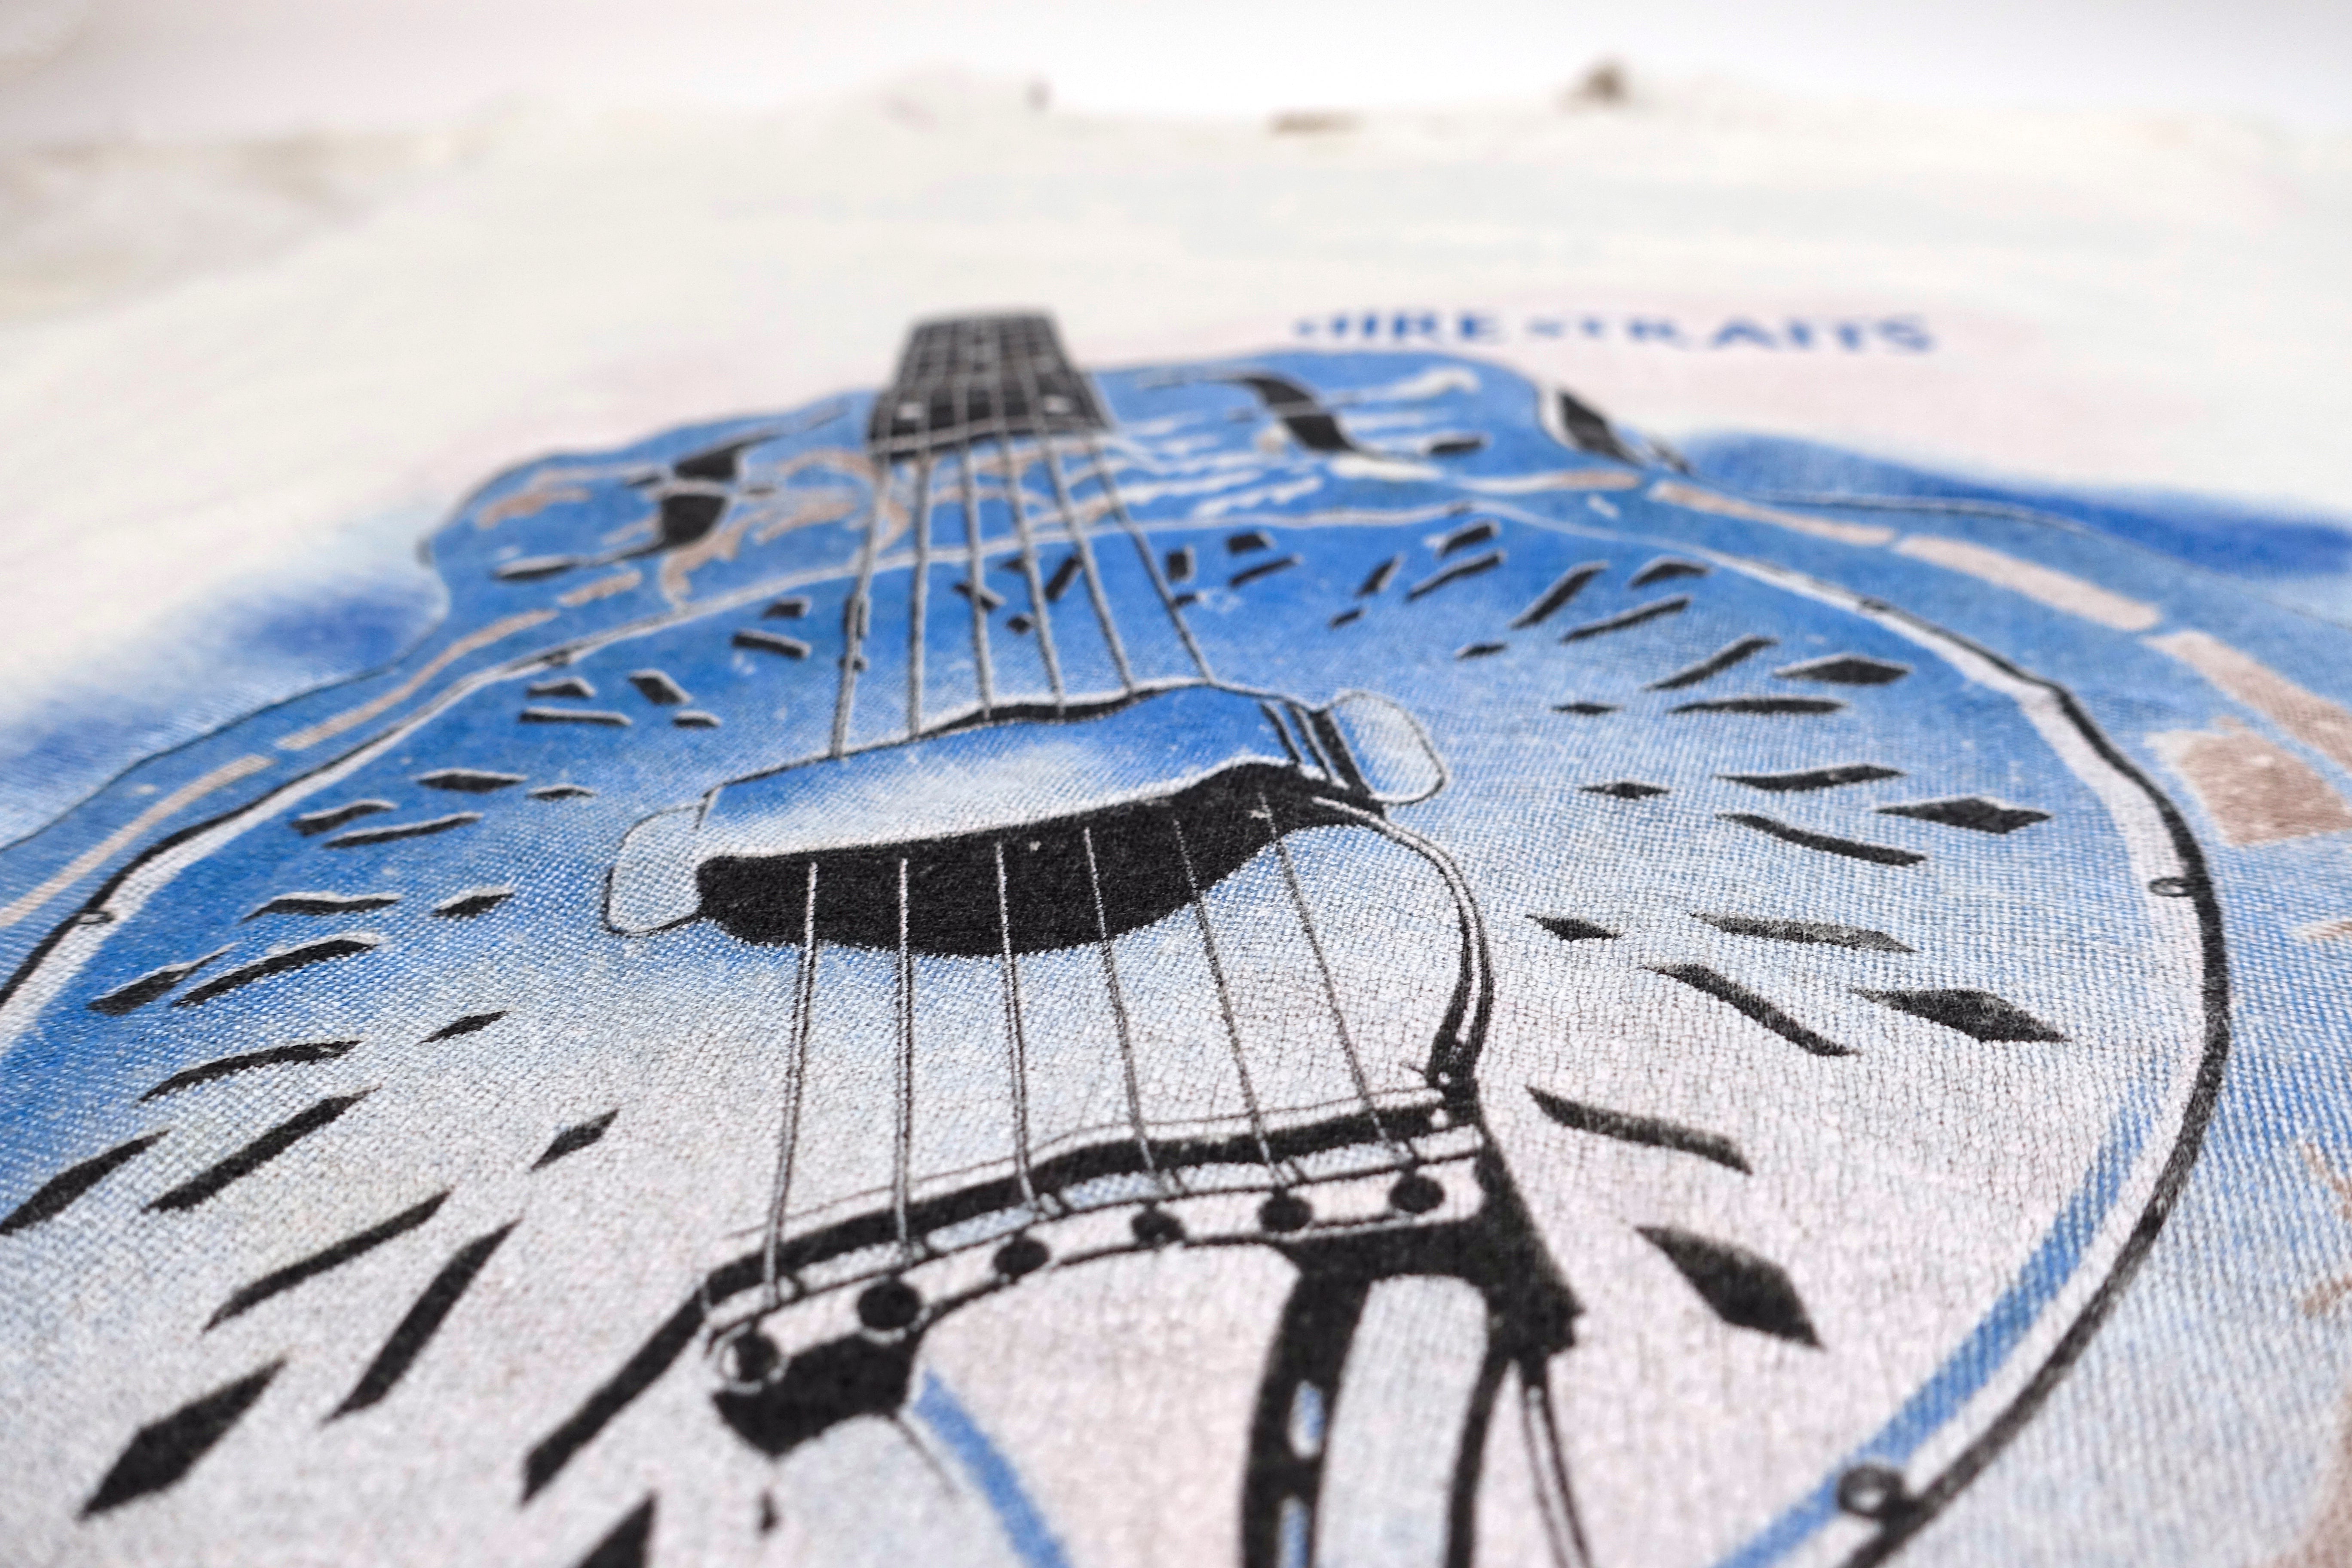 Dire Straits – Brothers In Arms Live in 1985 Tour Shirt Size Large